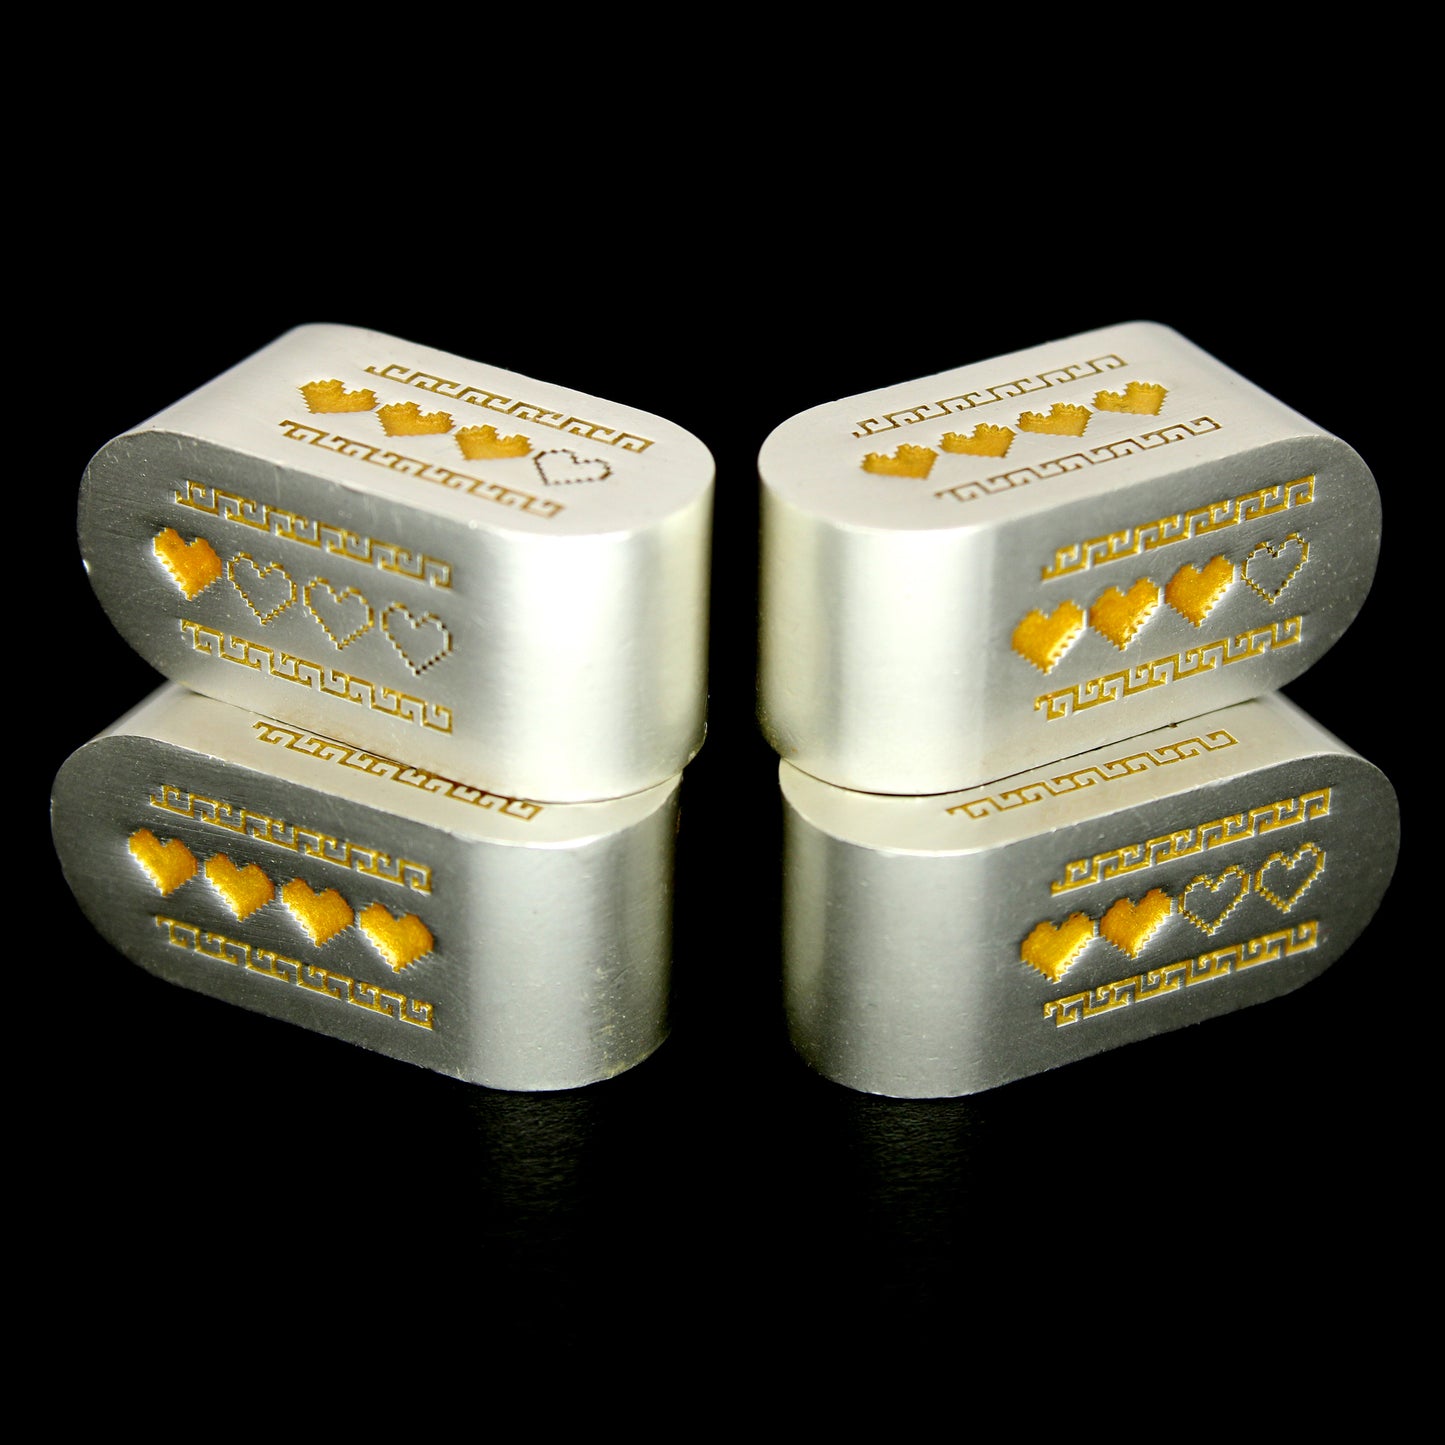 Pixel Hearts: Metal Healer Gold are custom Infinity d4s cast in silver metal and inked in gold.